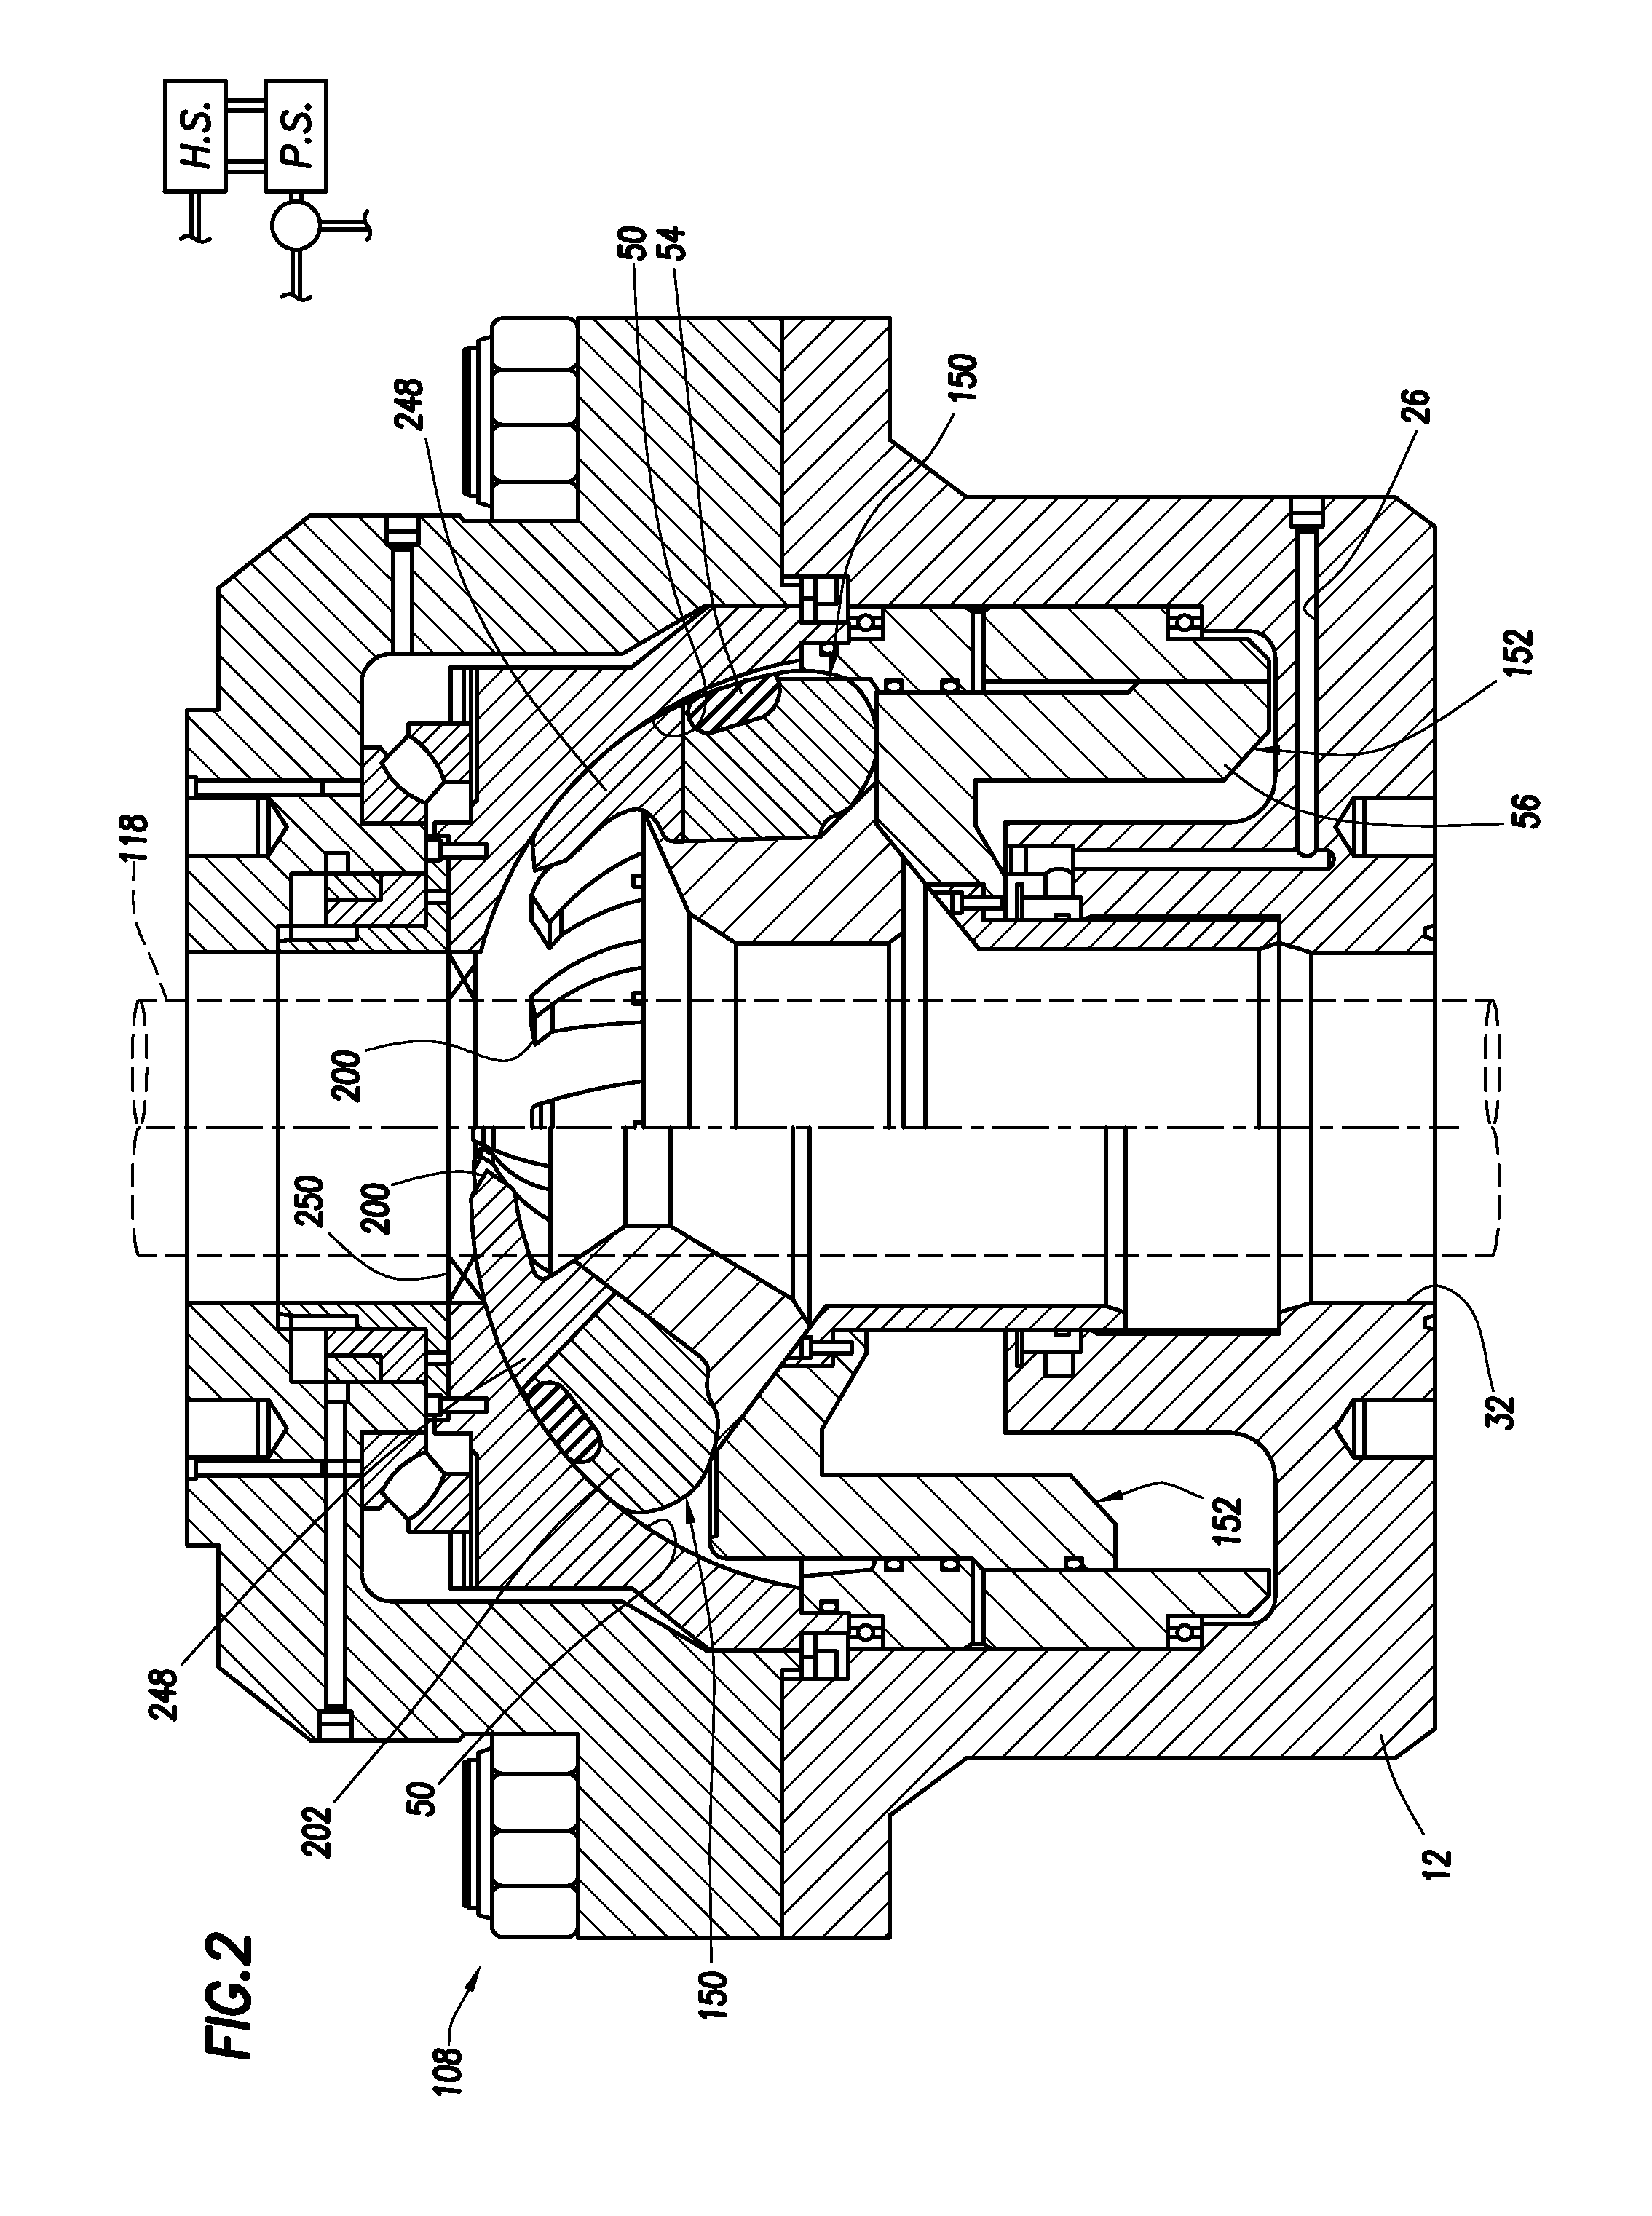 System and method for severing a tubular